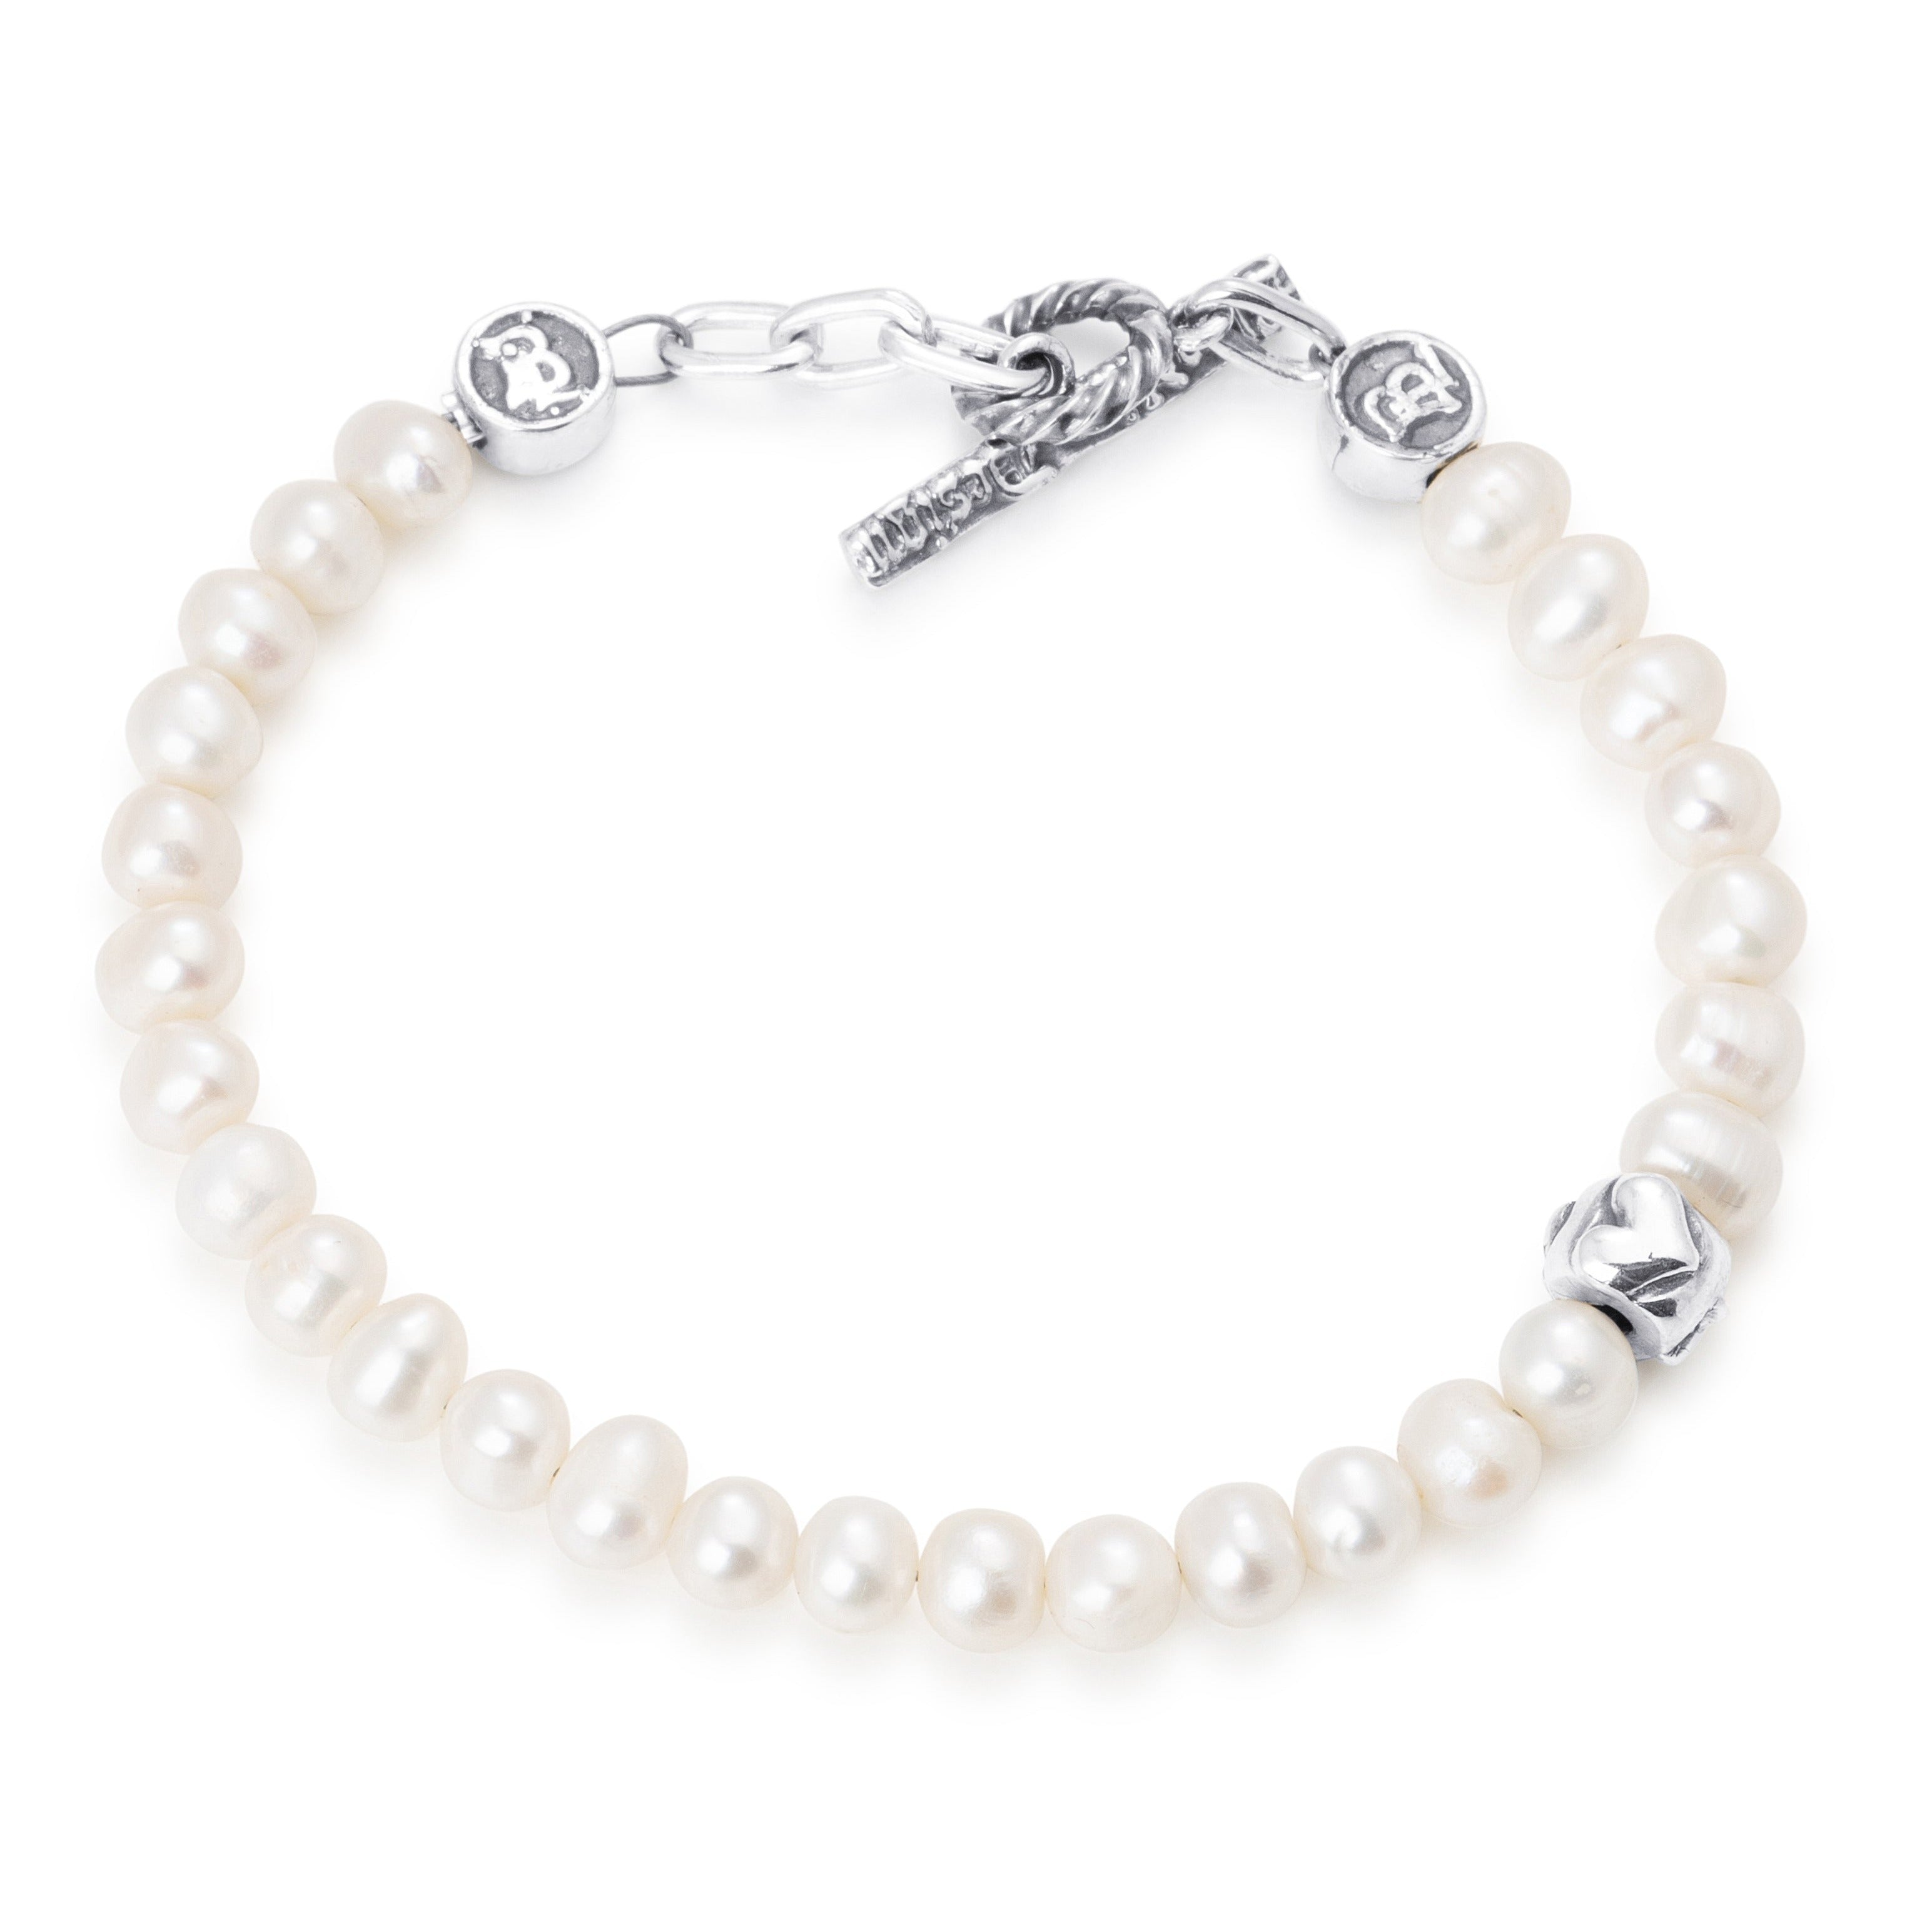 Pearls paired with a single sterling silver bead engraved with a heart star and skull on a stainless steel cable with Sterling silver T clasp.